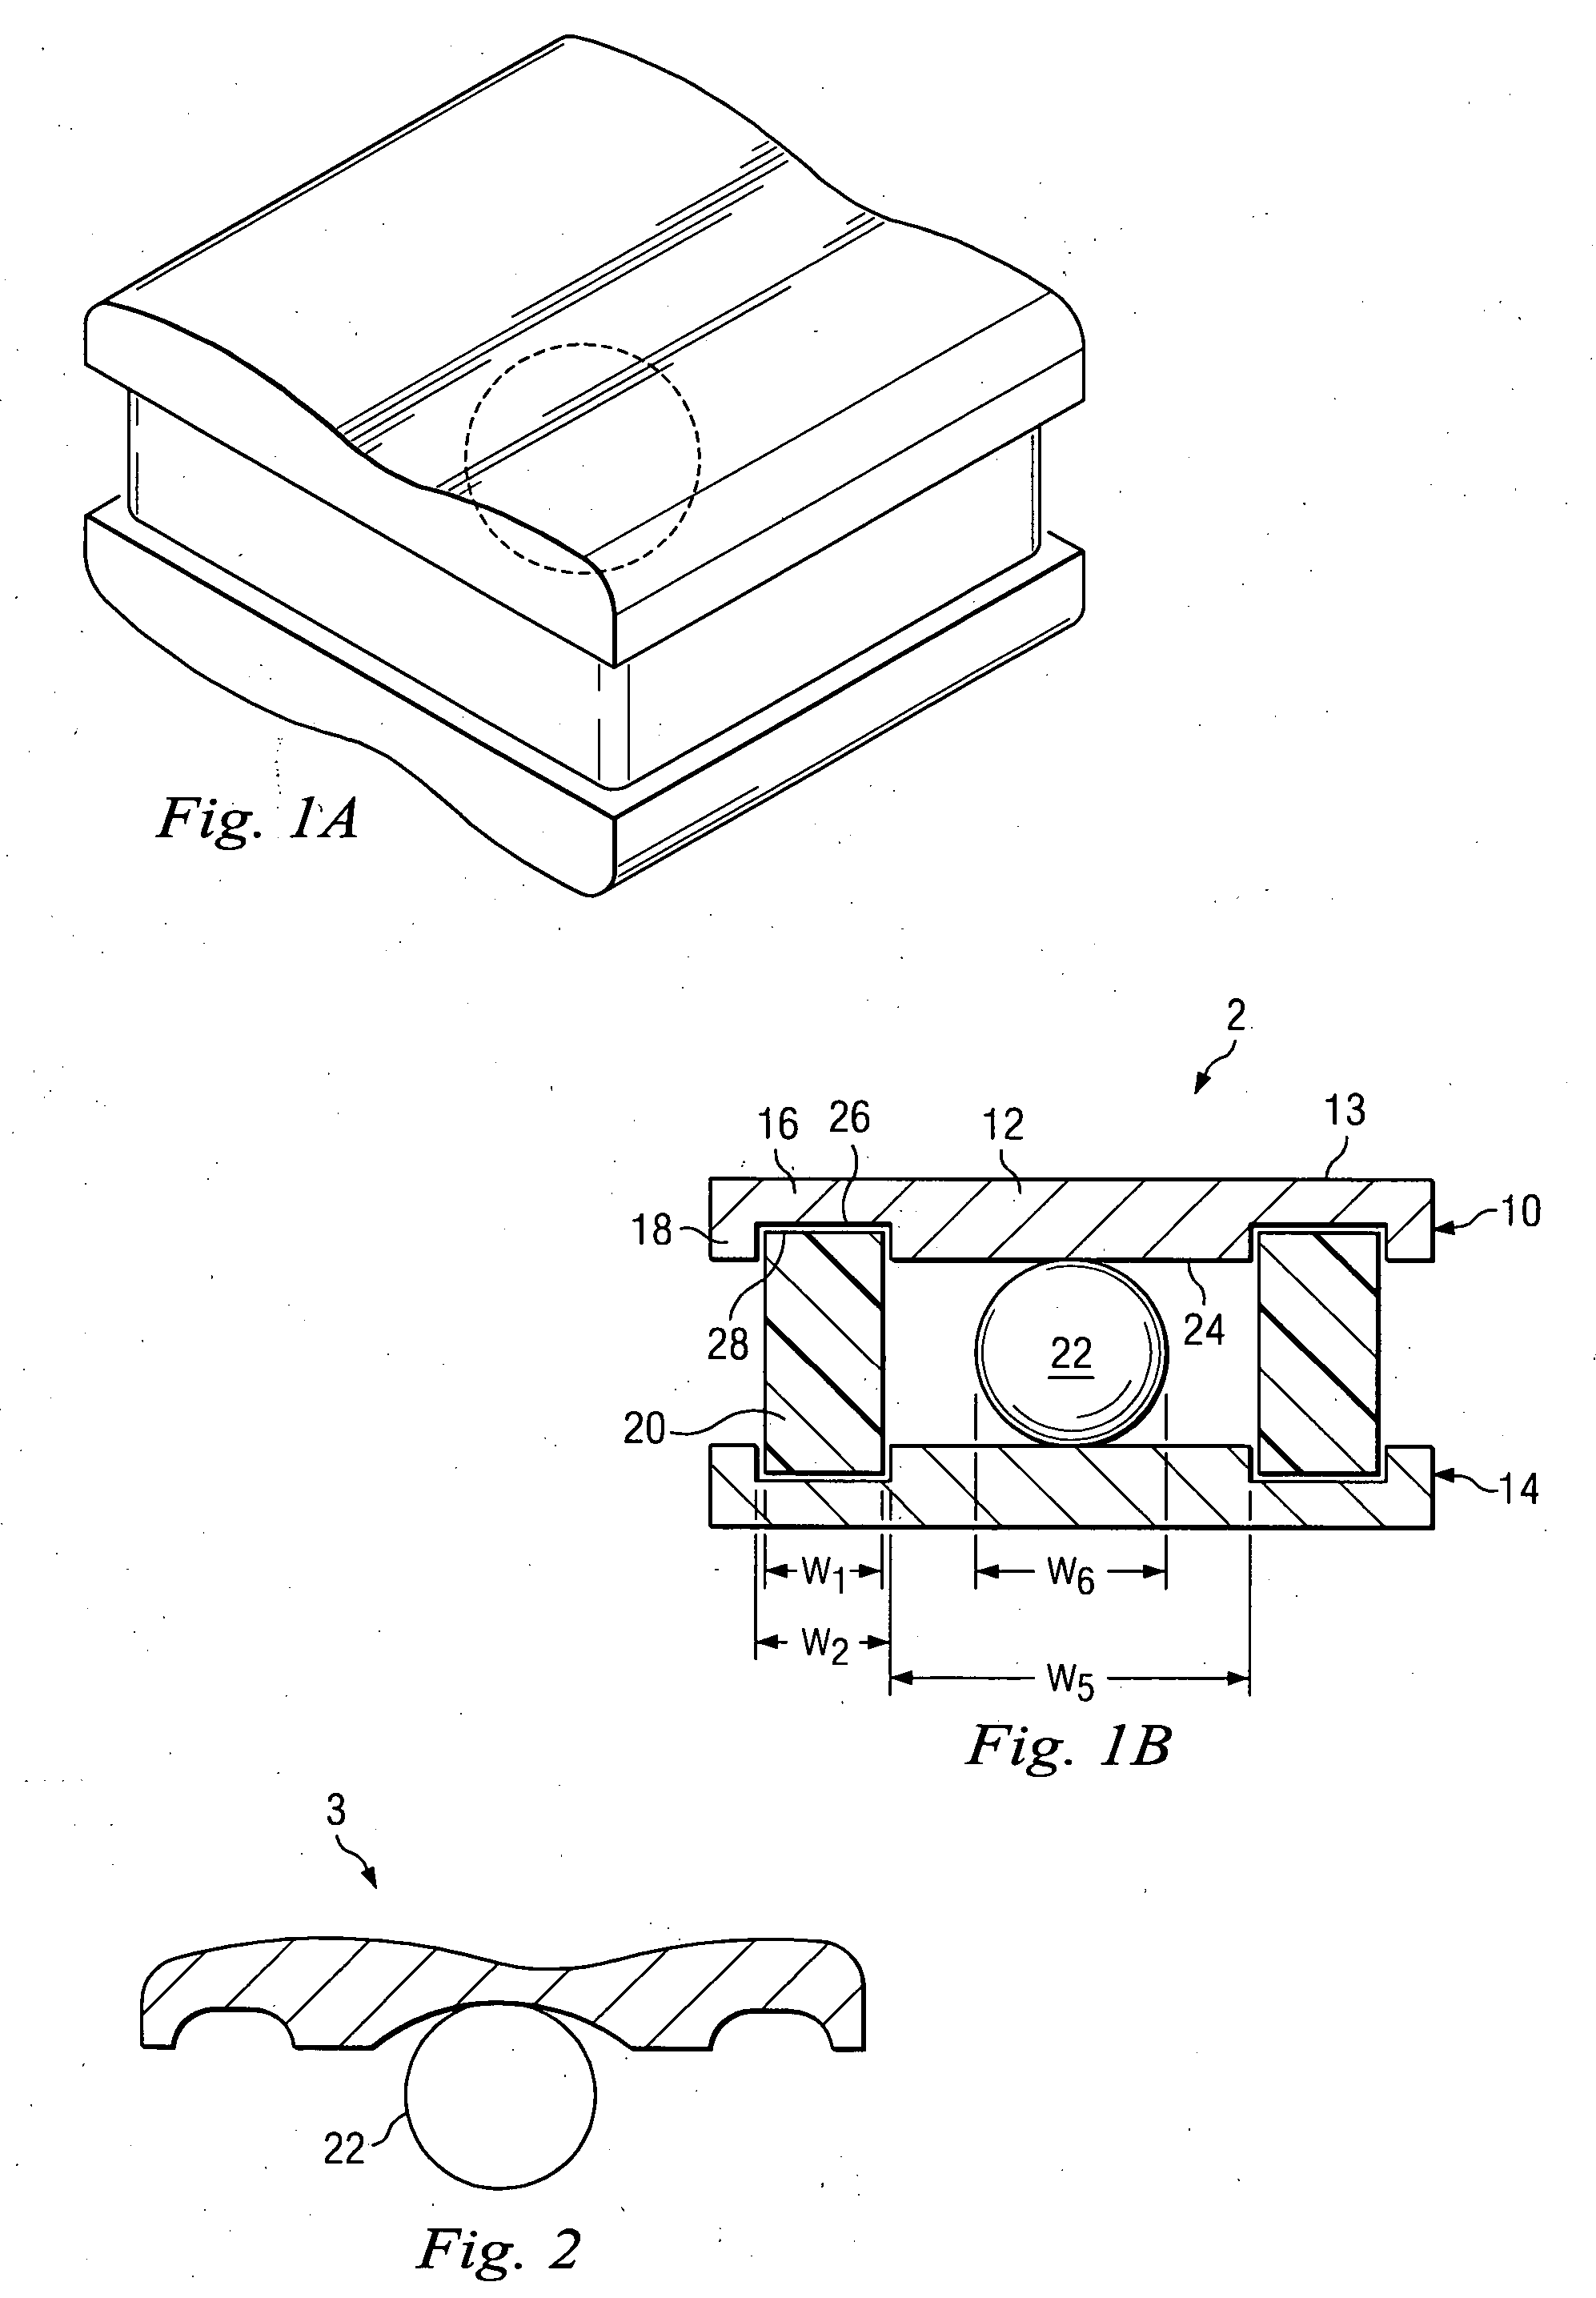 Semi-constrained and mobile-bearing disc prosthesis